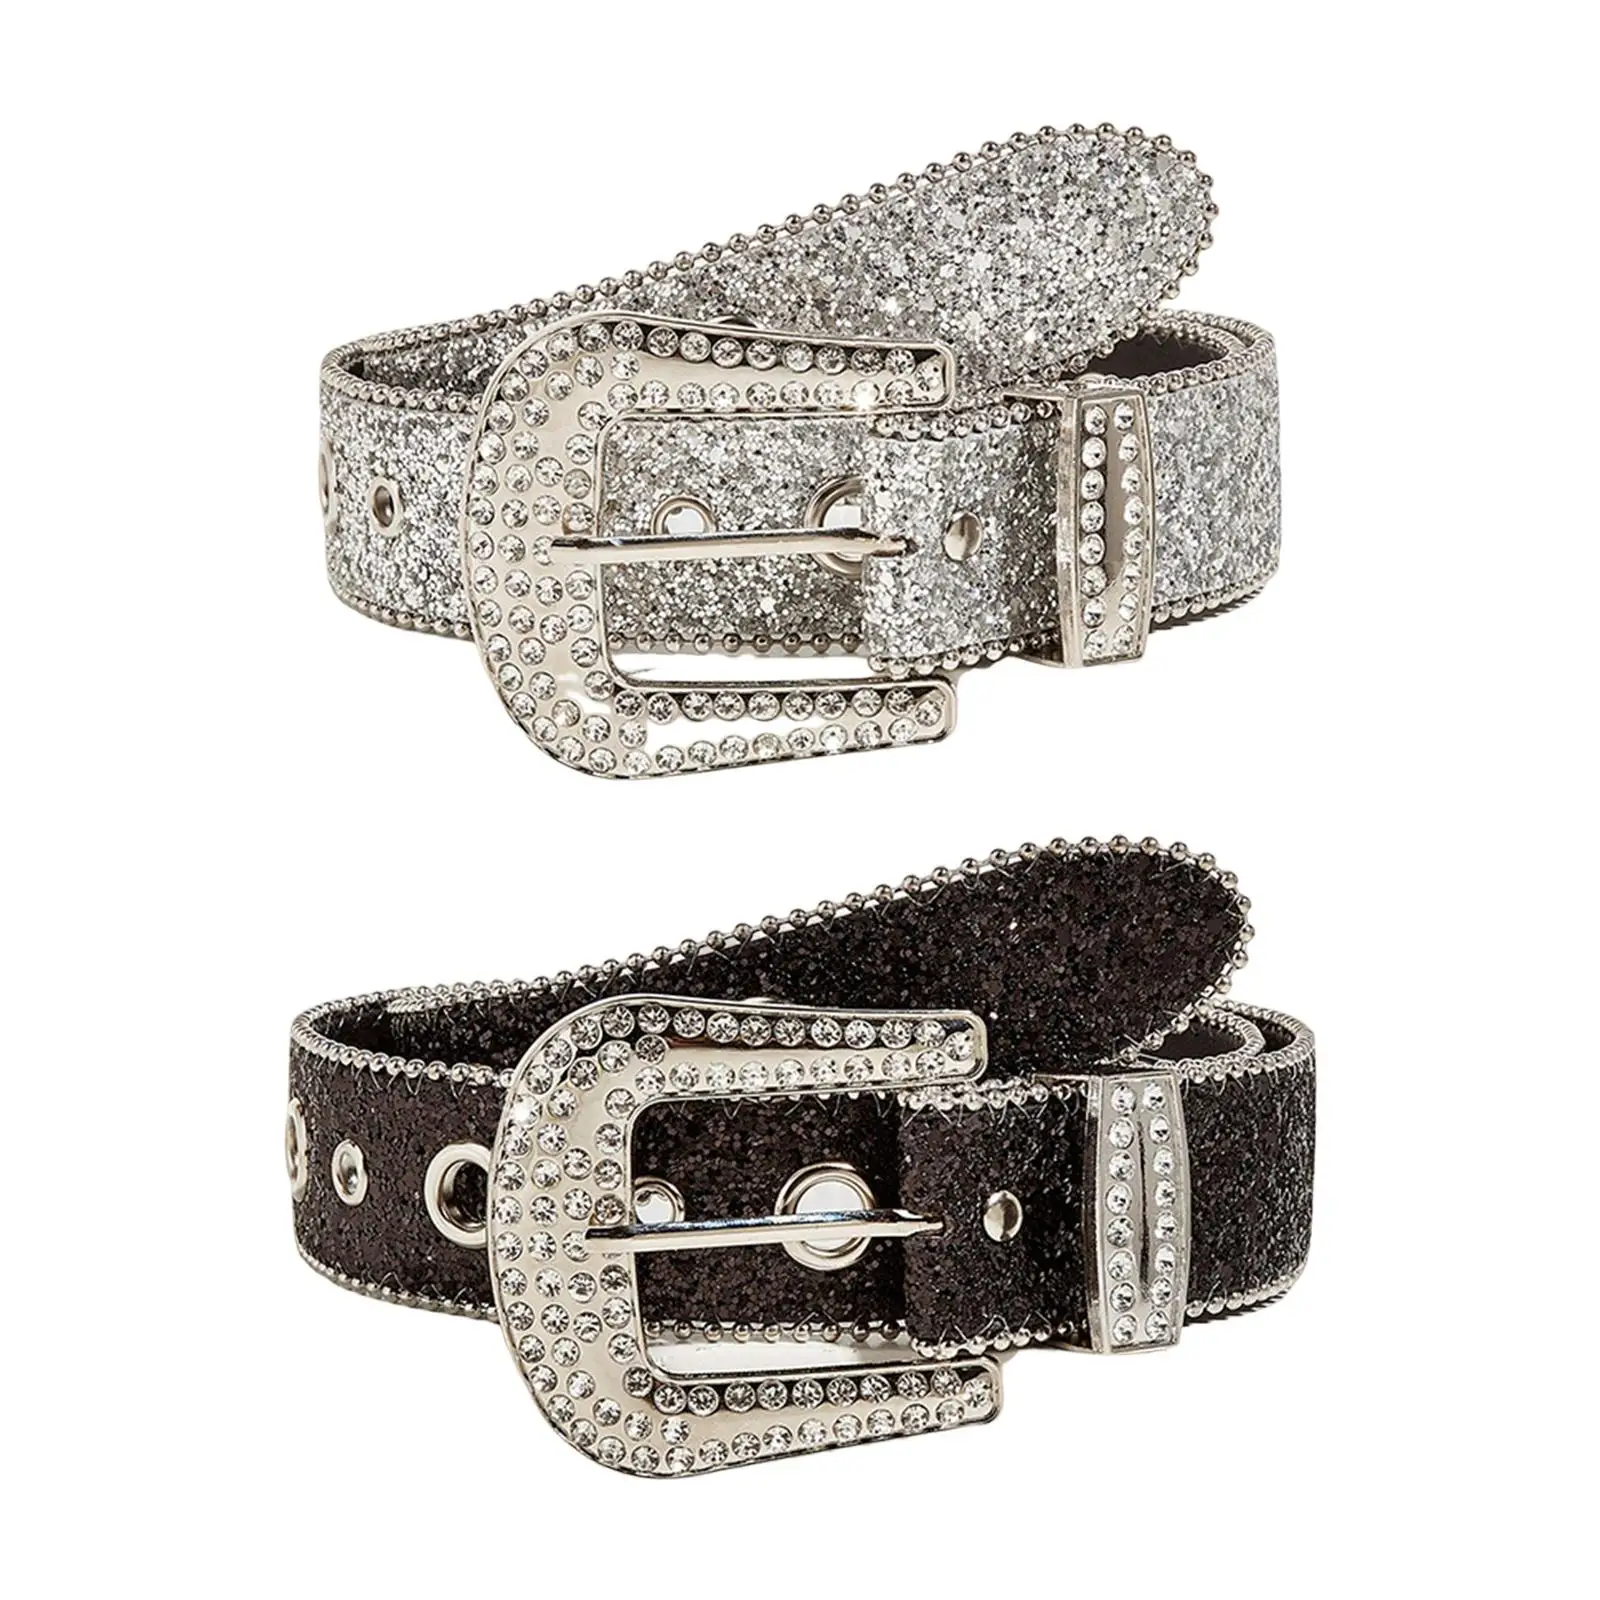 Women Belt Casual Sparkling Pin Buckle PU Leather Adjustable Rock Cowgirl Leather Belt for Evening Dresses Accessories Prom Men